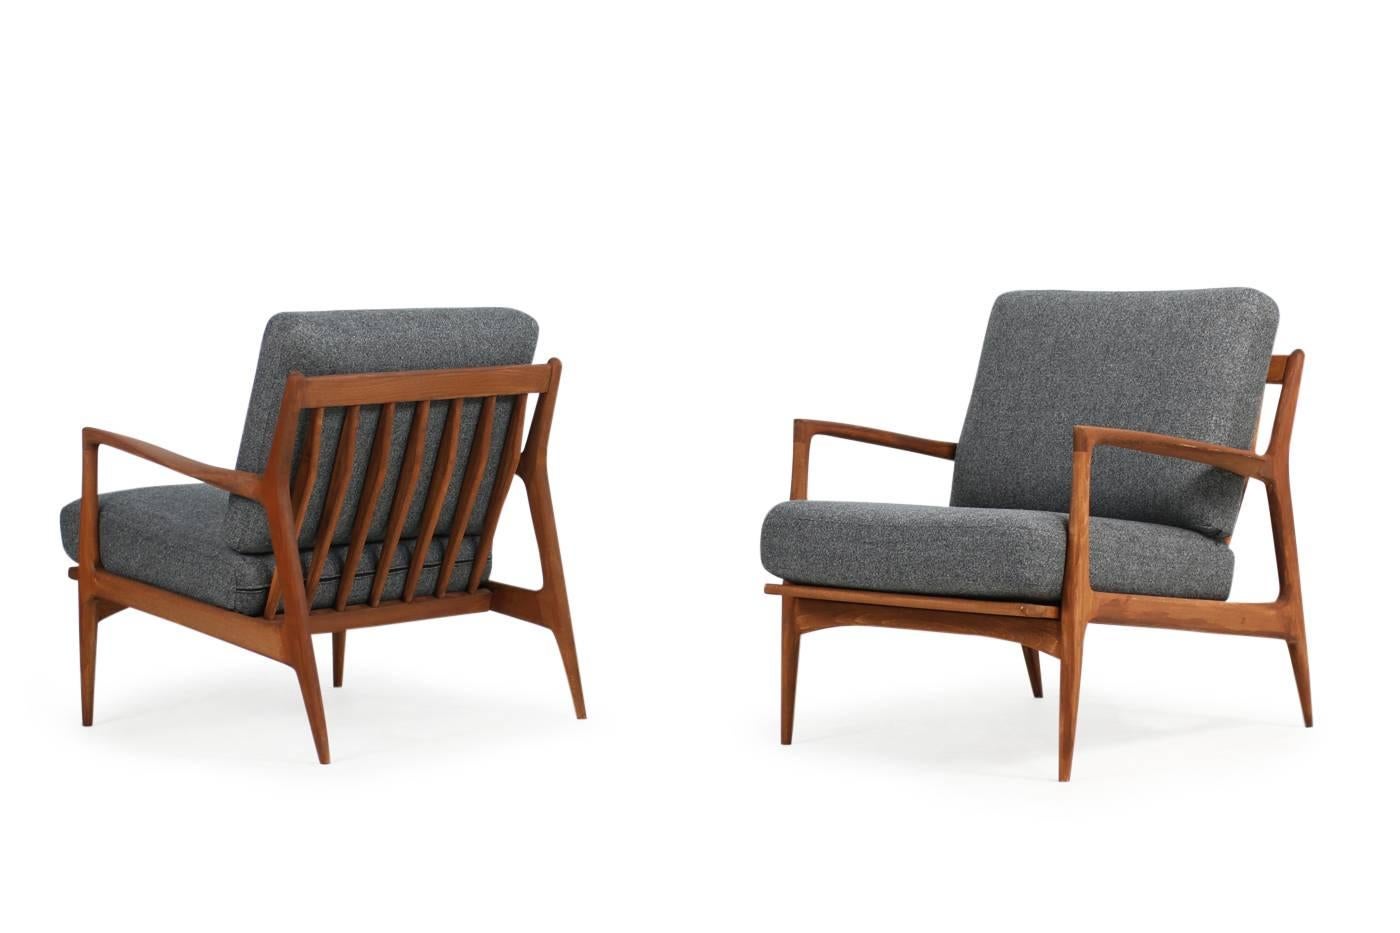 Beautiful set of two matching, organic, 1960s easy chairs, designed by Ib Kofod Larsen, beechwood, teak stained, new upholstery and new high quality, grey wool woven fabric. Fantastic condition, beautiful form and design.